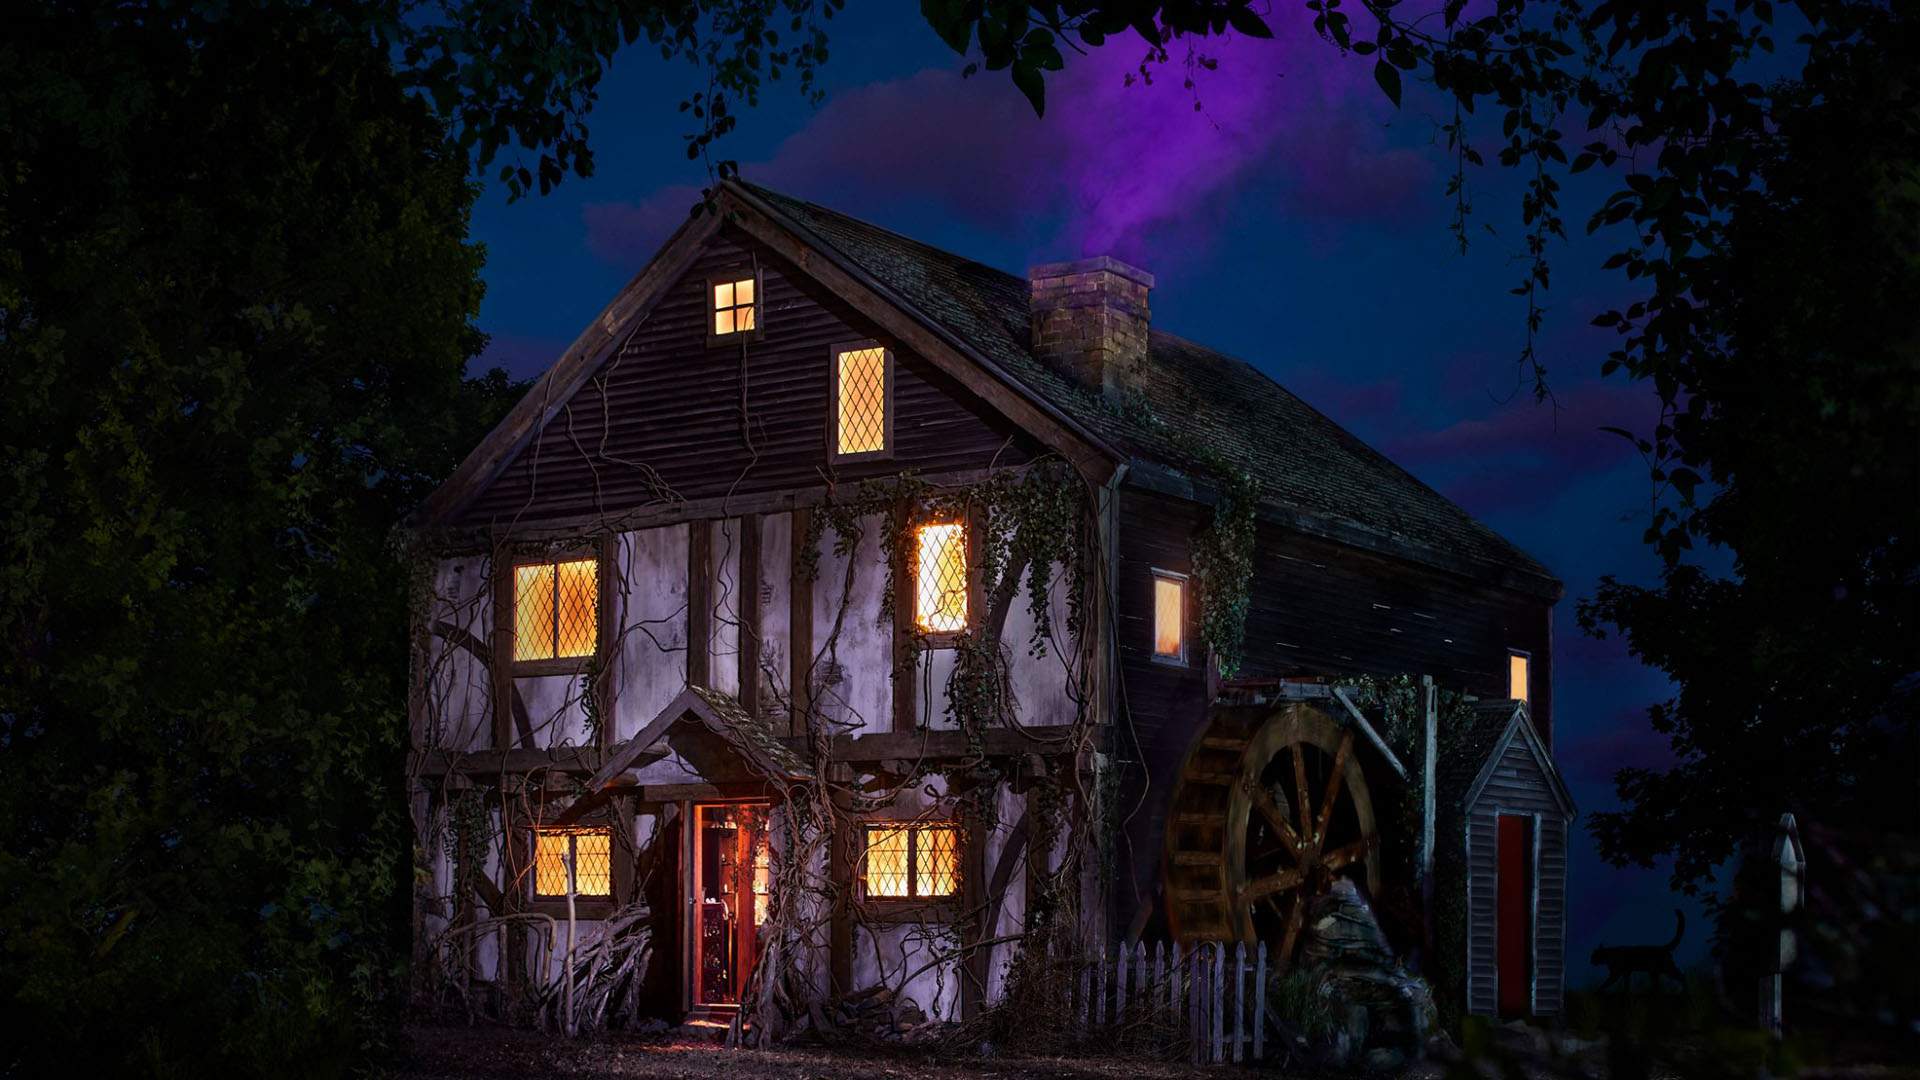 Airbnb Wants You to Run Amok, Amok, Amok Like the Sanderson Sisters in the 'Hocus Pocus' Cottage